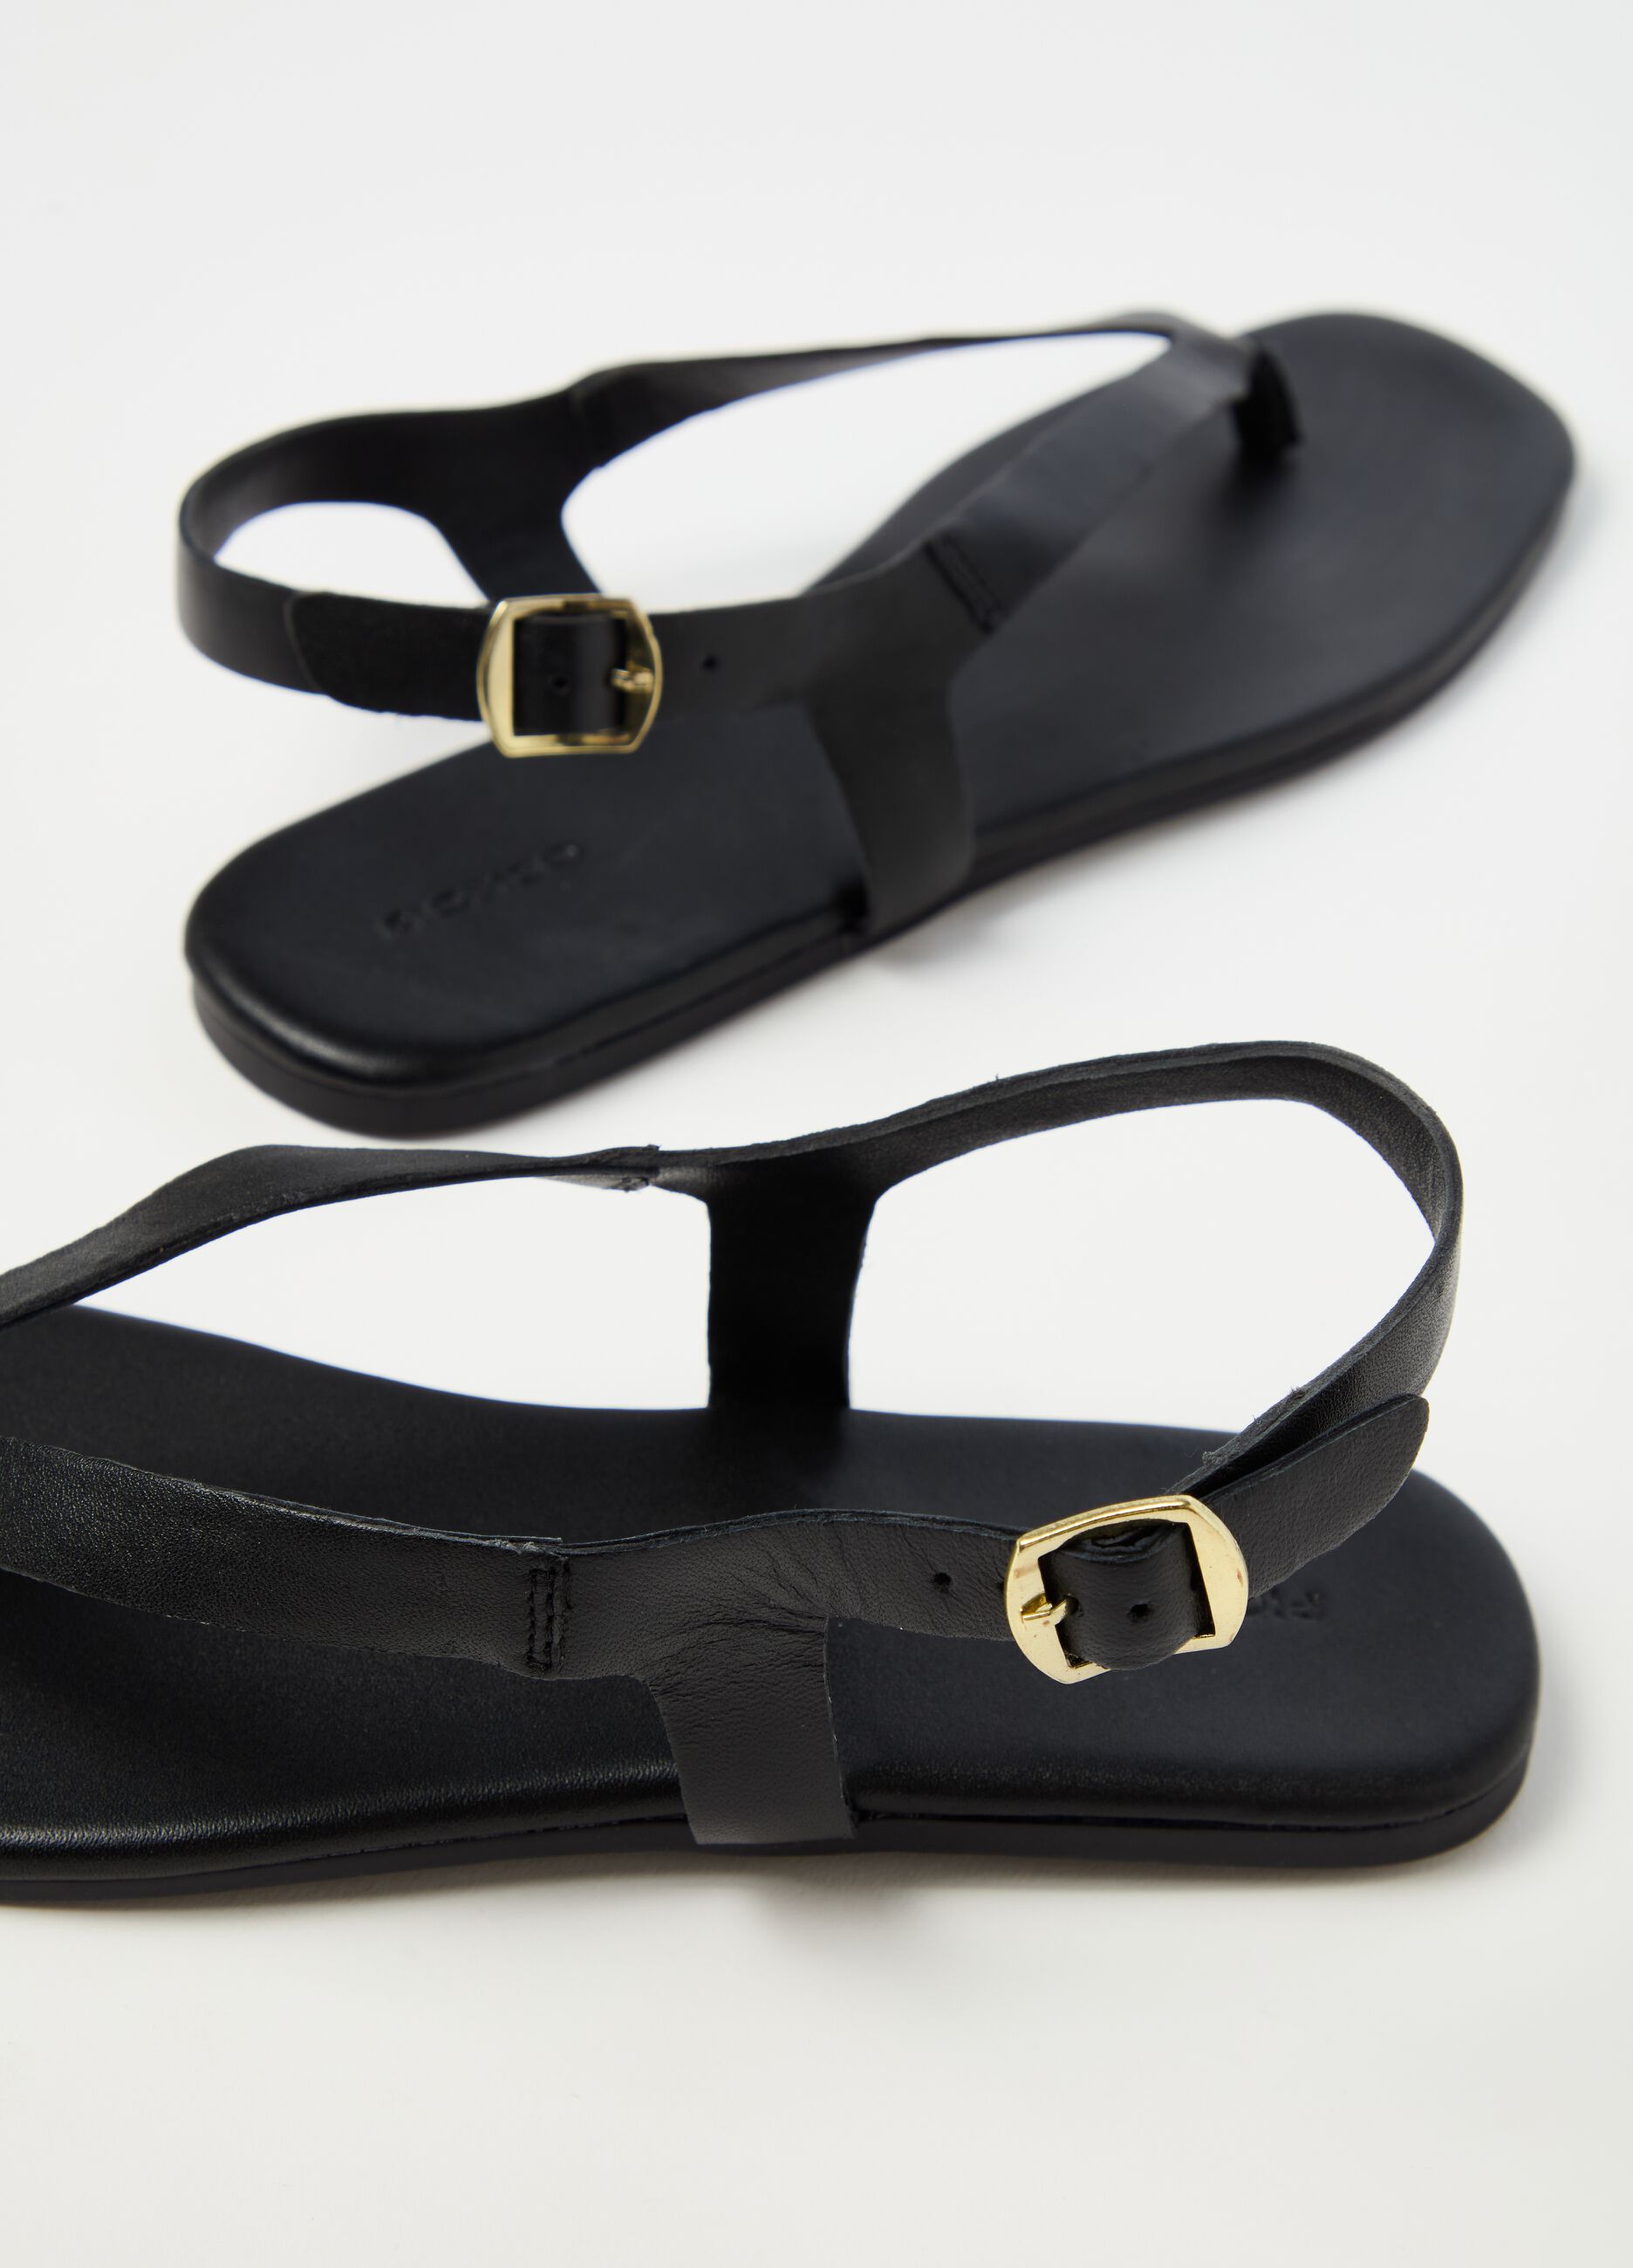 Contemporary thong sandals in leather